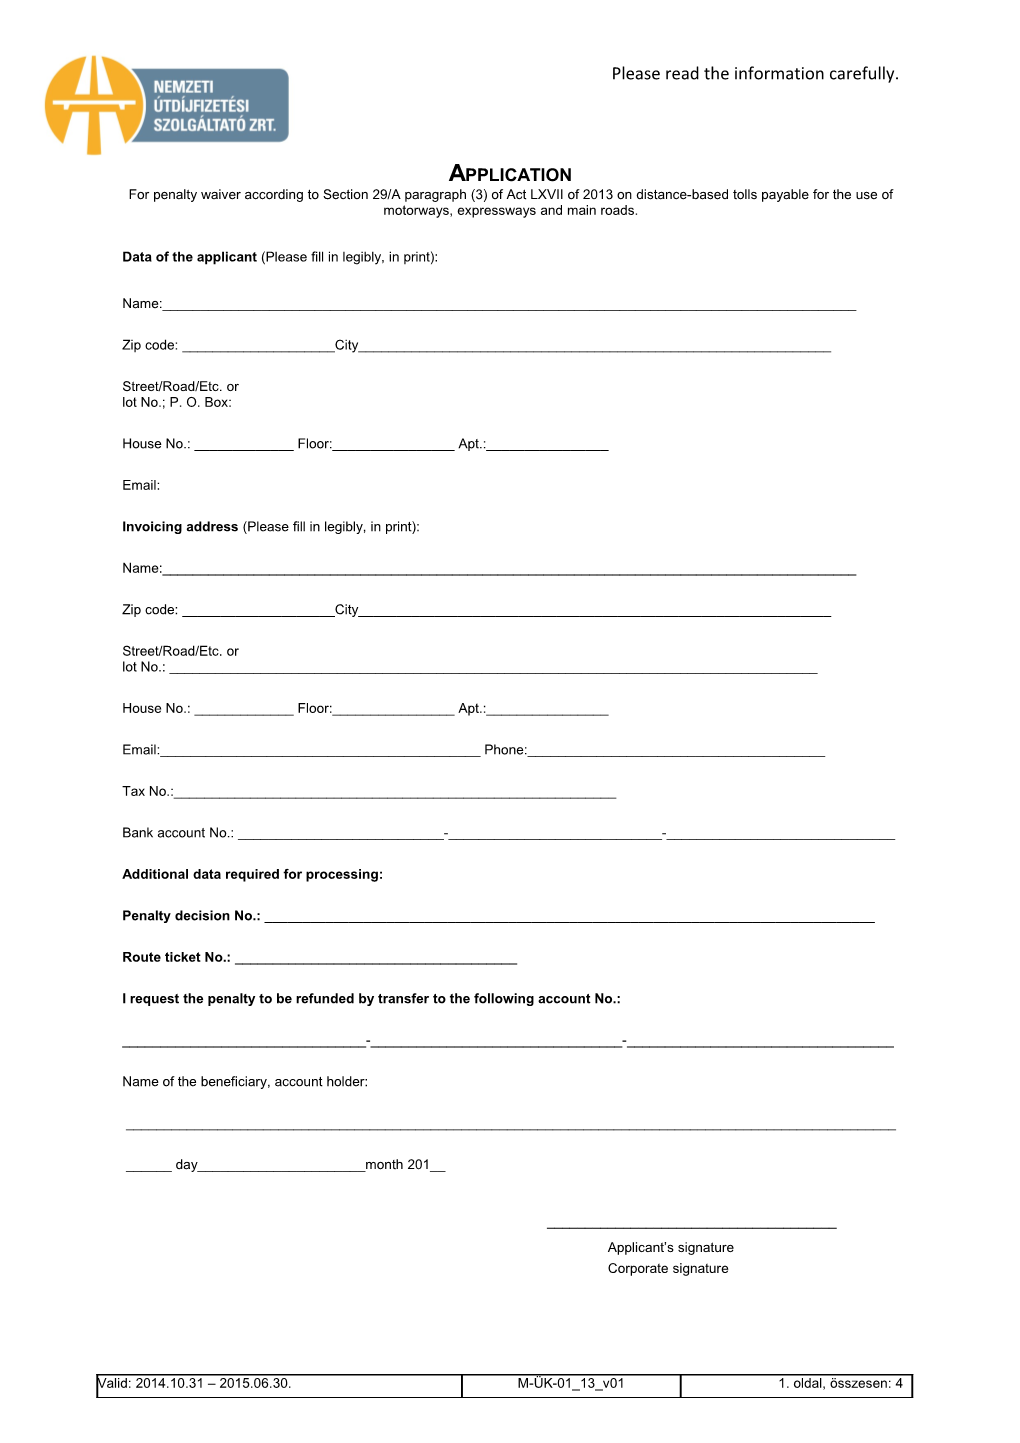 Data of the Applicant (Please Fill in Legibly, in Print)